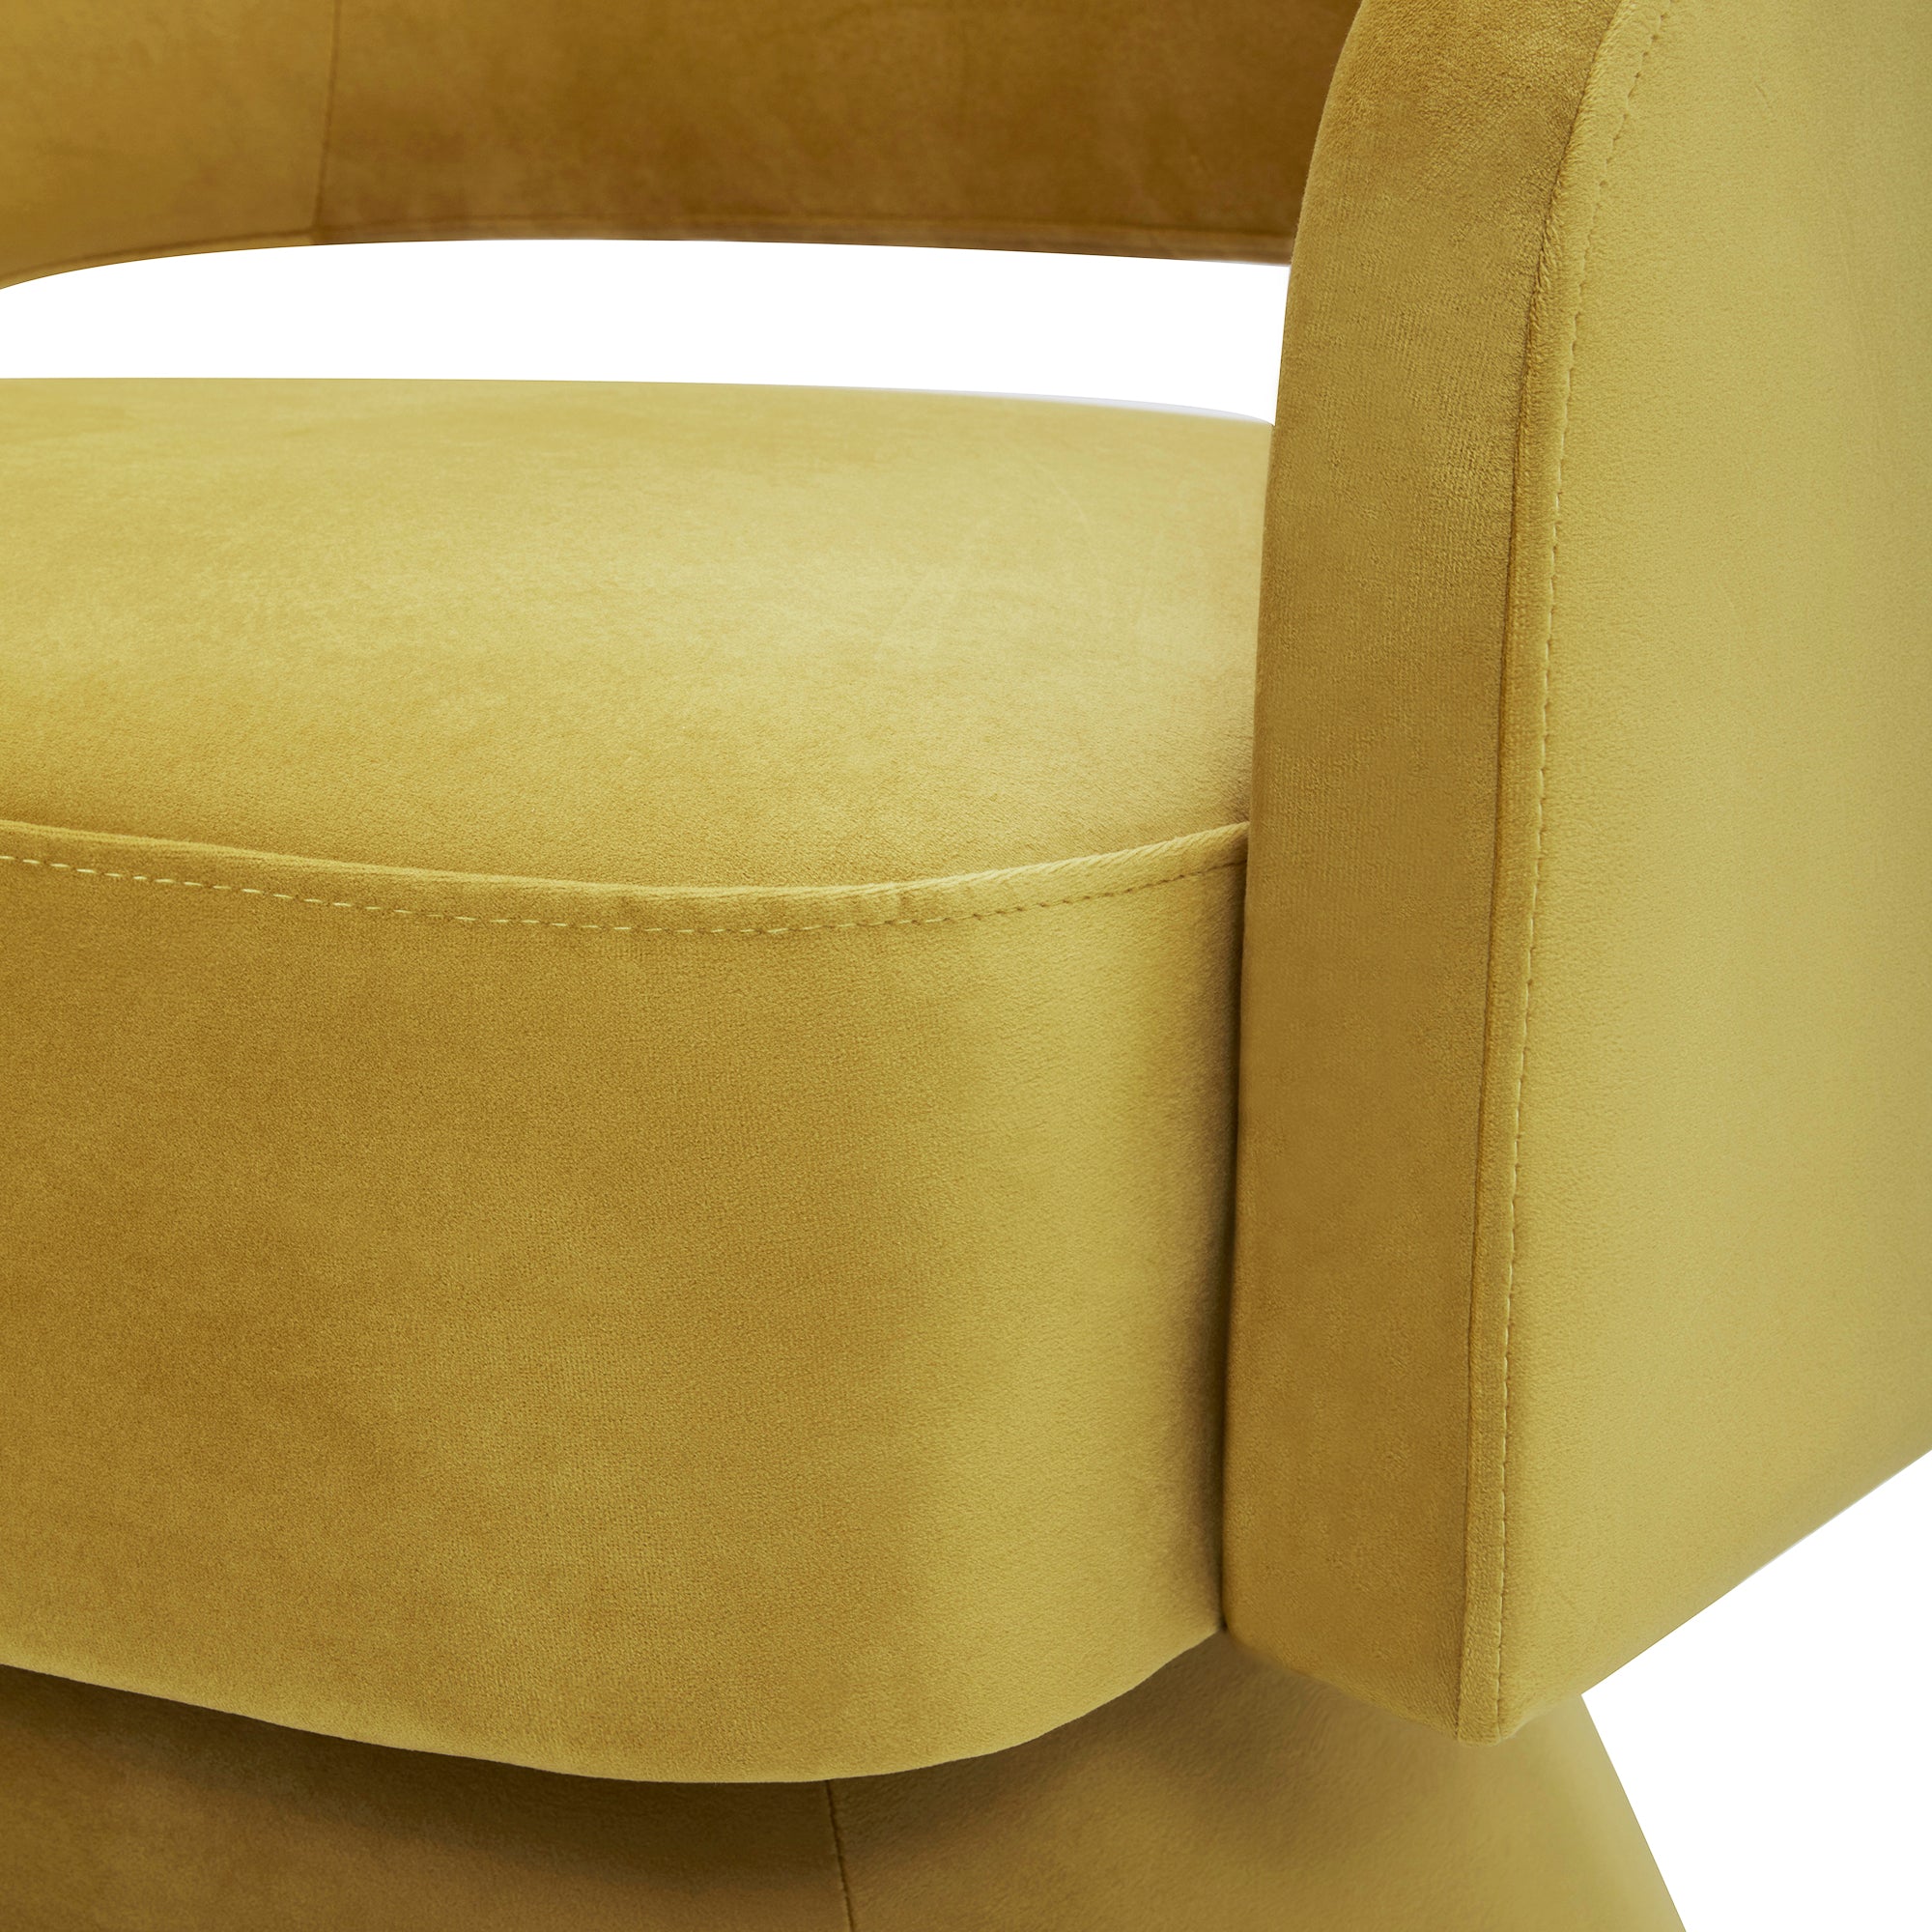 CHITA LIVING-Ambre Swivel Accent Chair-Accent Chair-Velvet-Yellow-